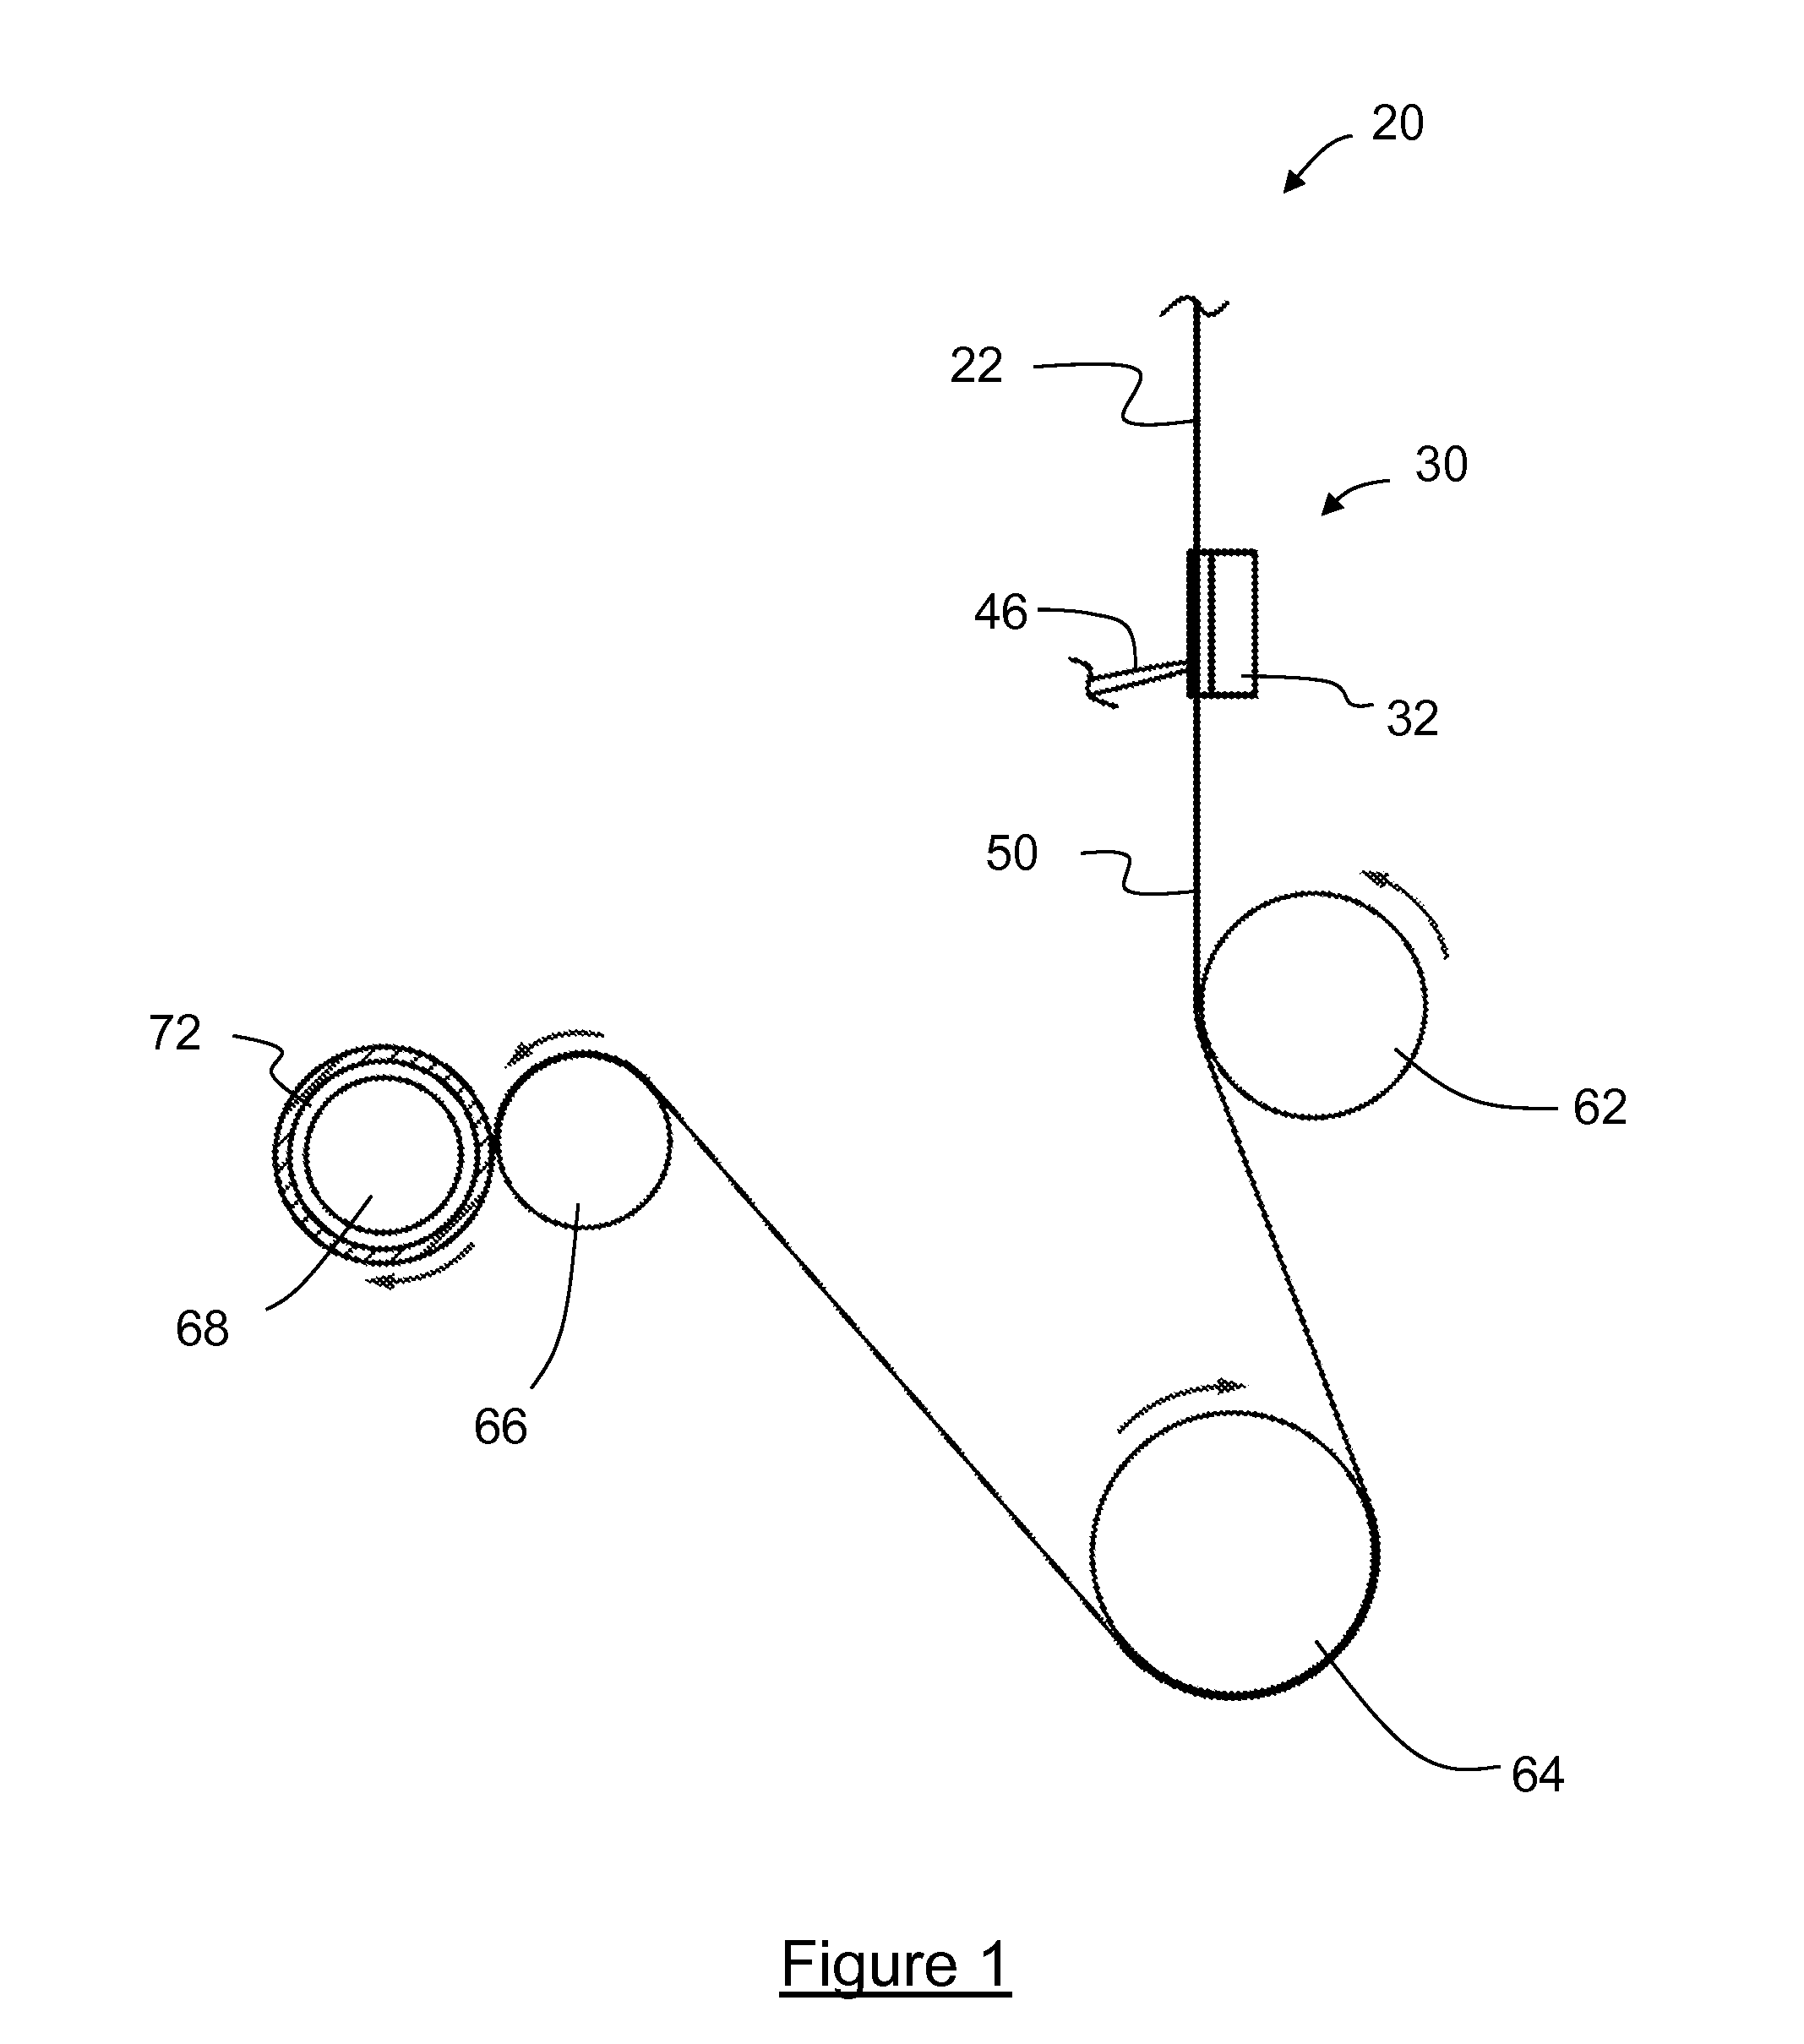 Method and apparatus for fabricating stretch film rolls